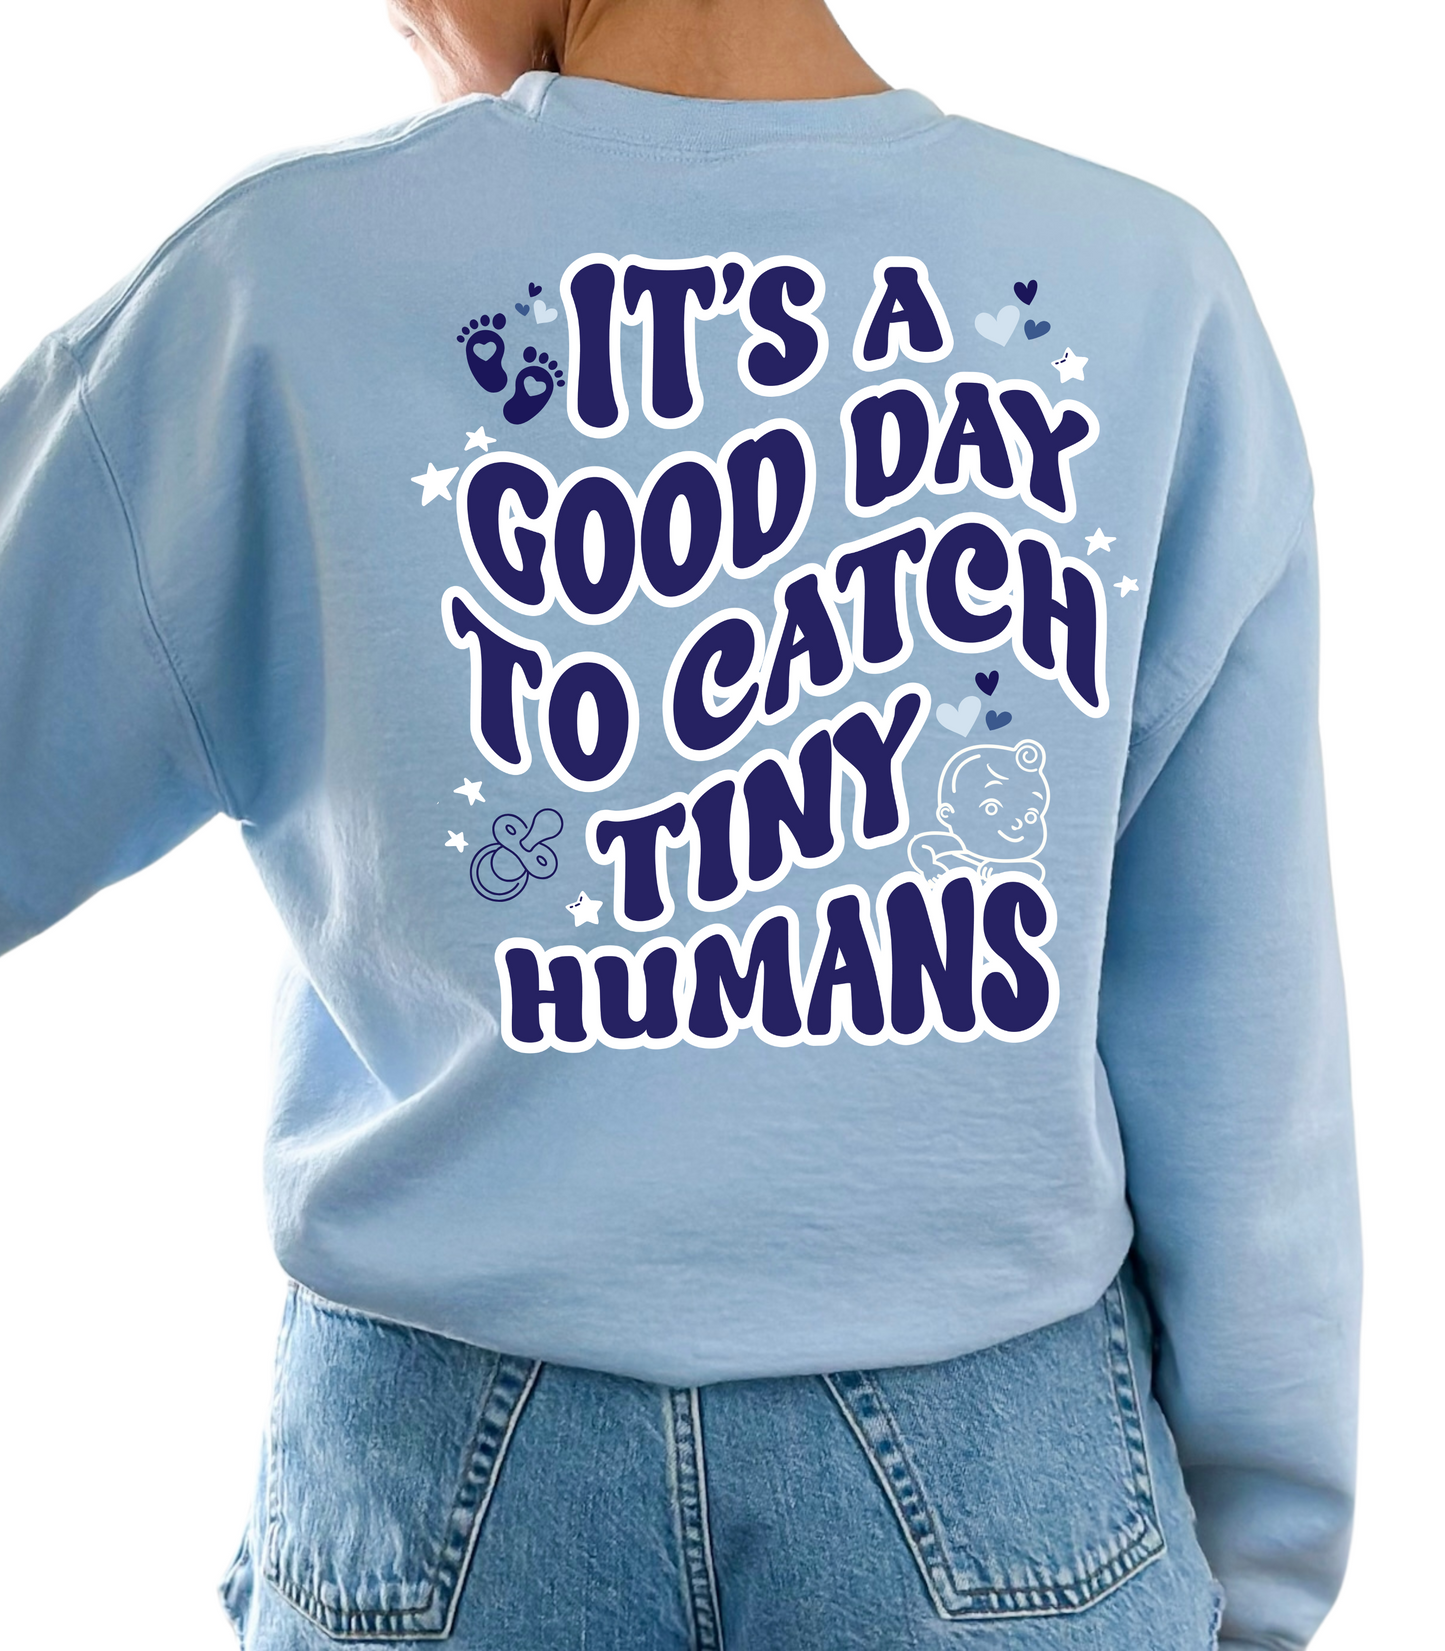 IT'S A GREAT DAY TO CATCH TINY HUMANS FRONT & BACK CREW